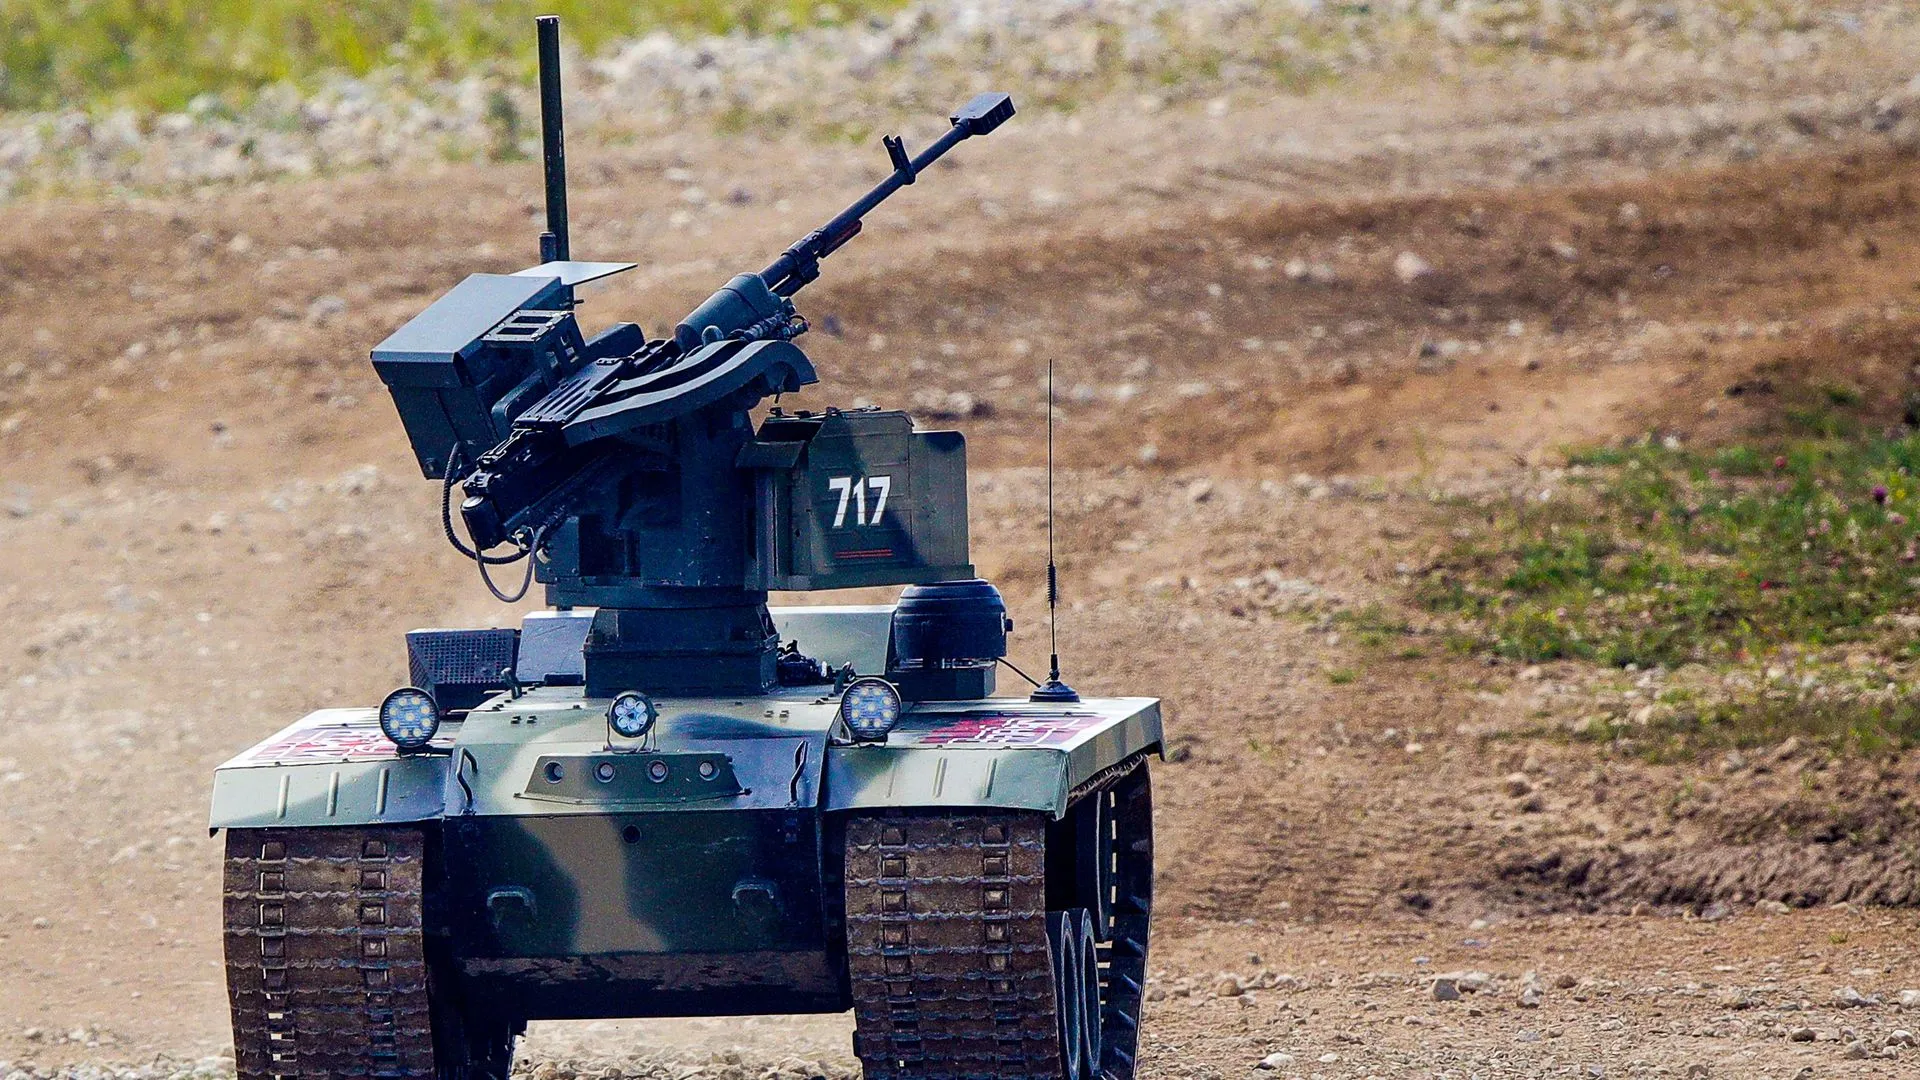 A small robotic tank, painted in military camouflage, with a machine gun mounted on it.